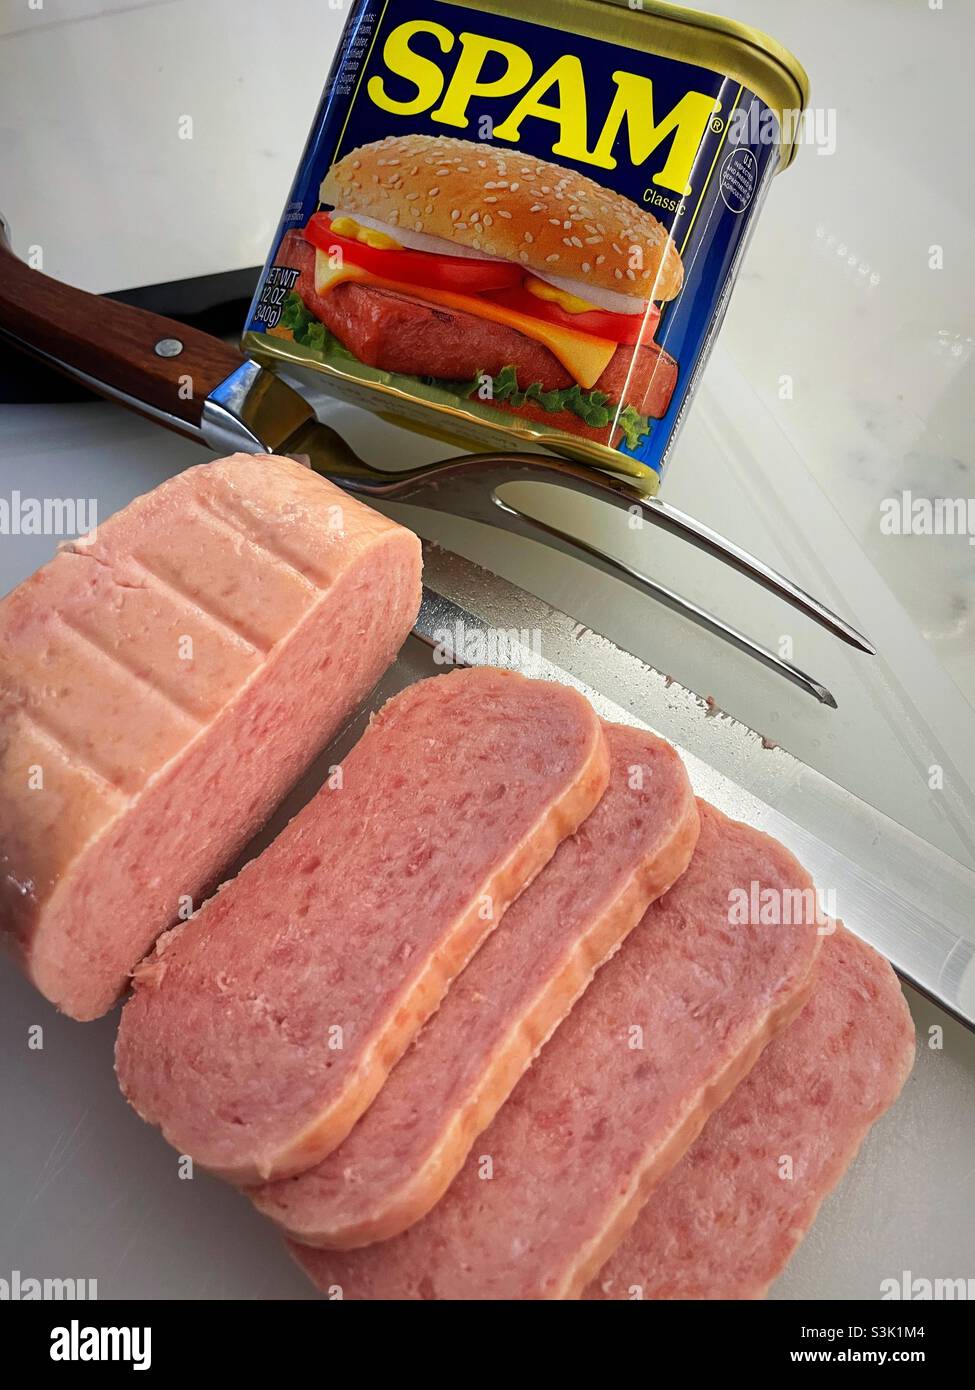 Slices of the cooked pork product spam on a cutting board with a knife and  fork, USA Stock Photo - Alamy